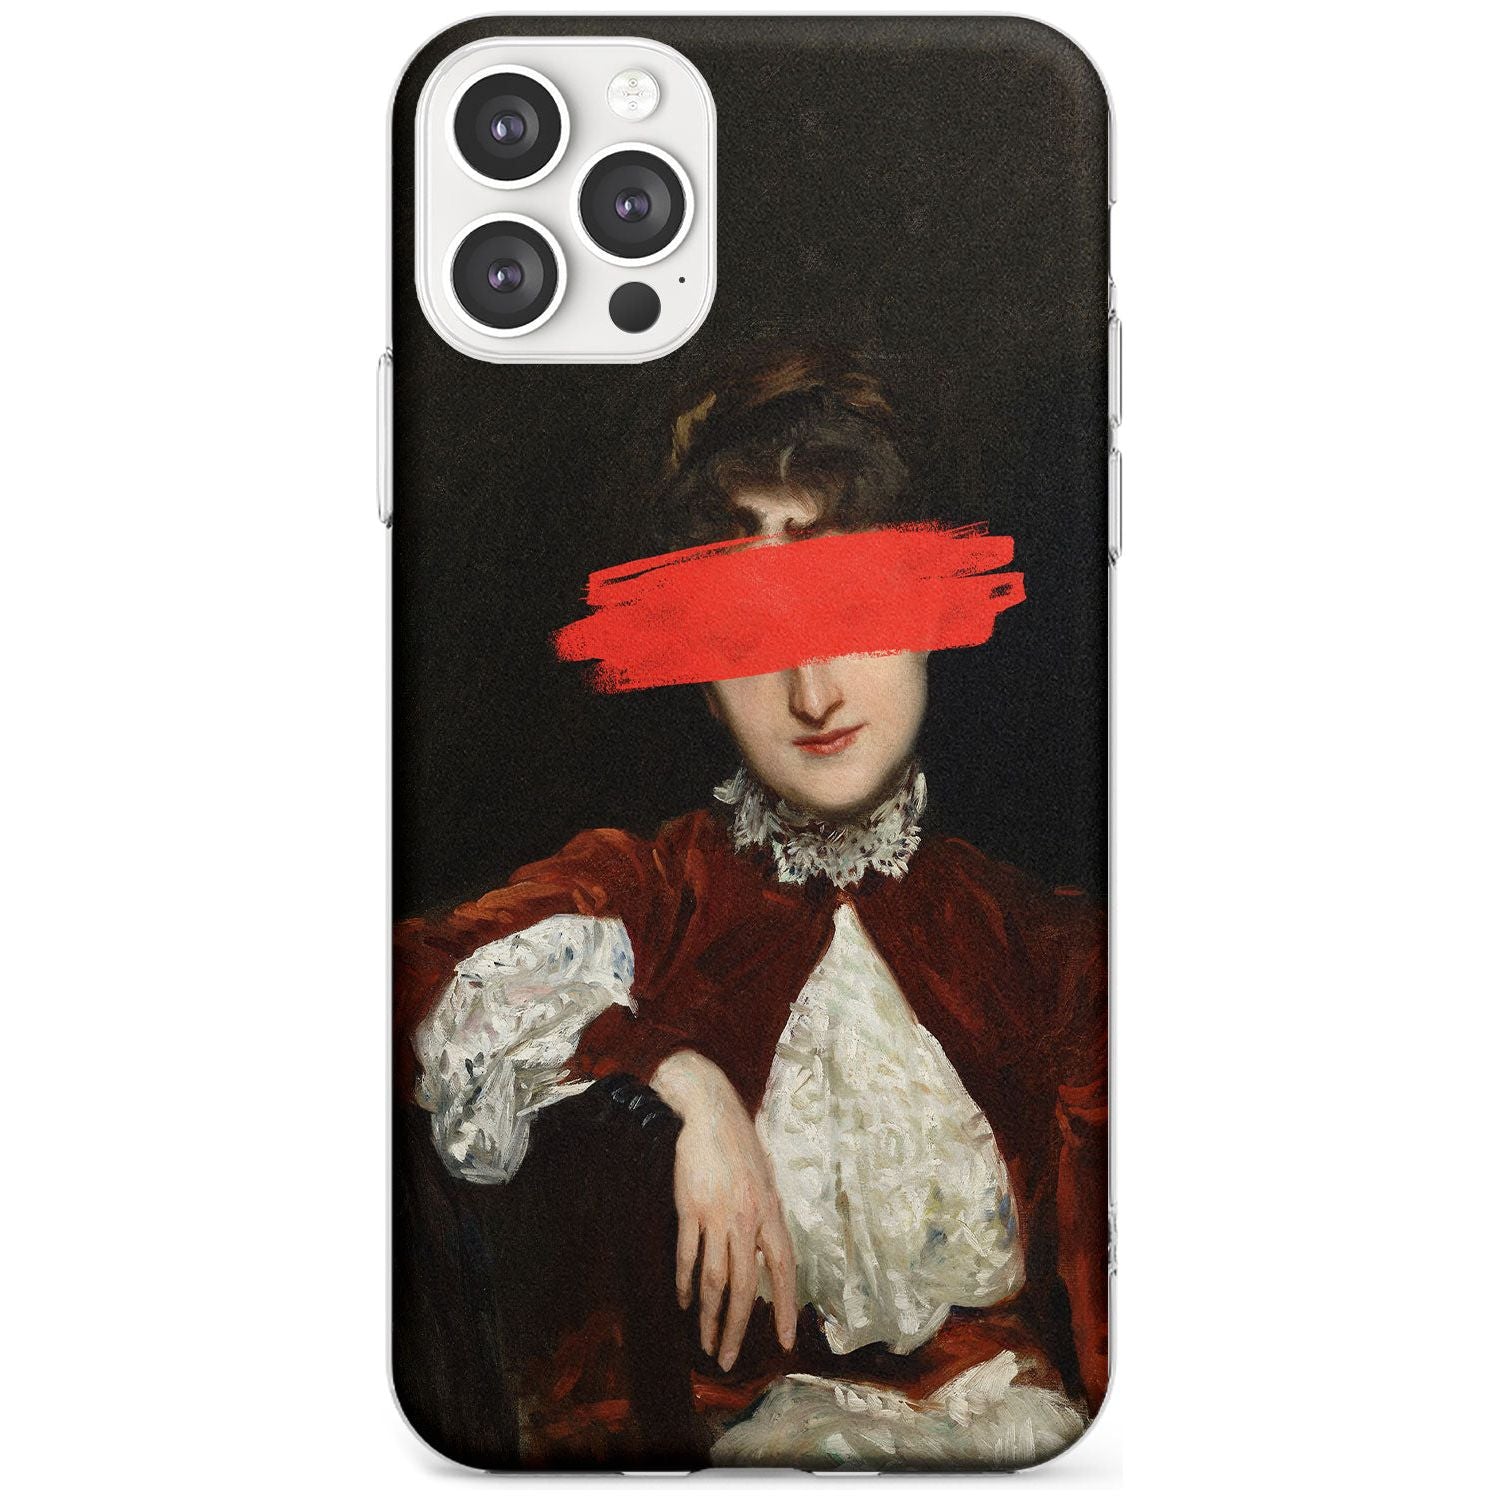 A NEW DAWN Black Impact Phone Case for iPhone 11 Pro Max